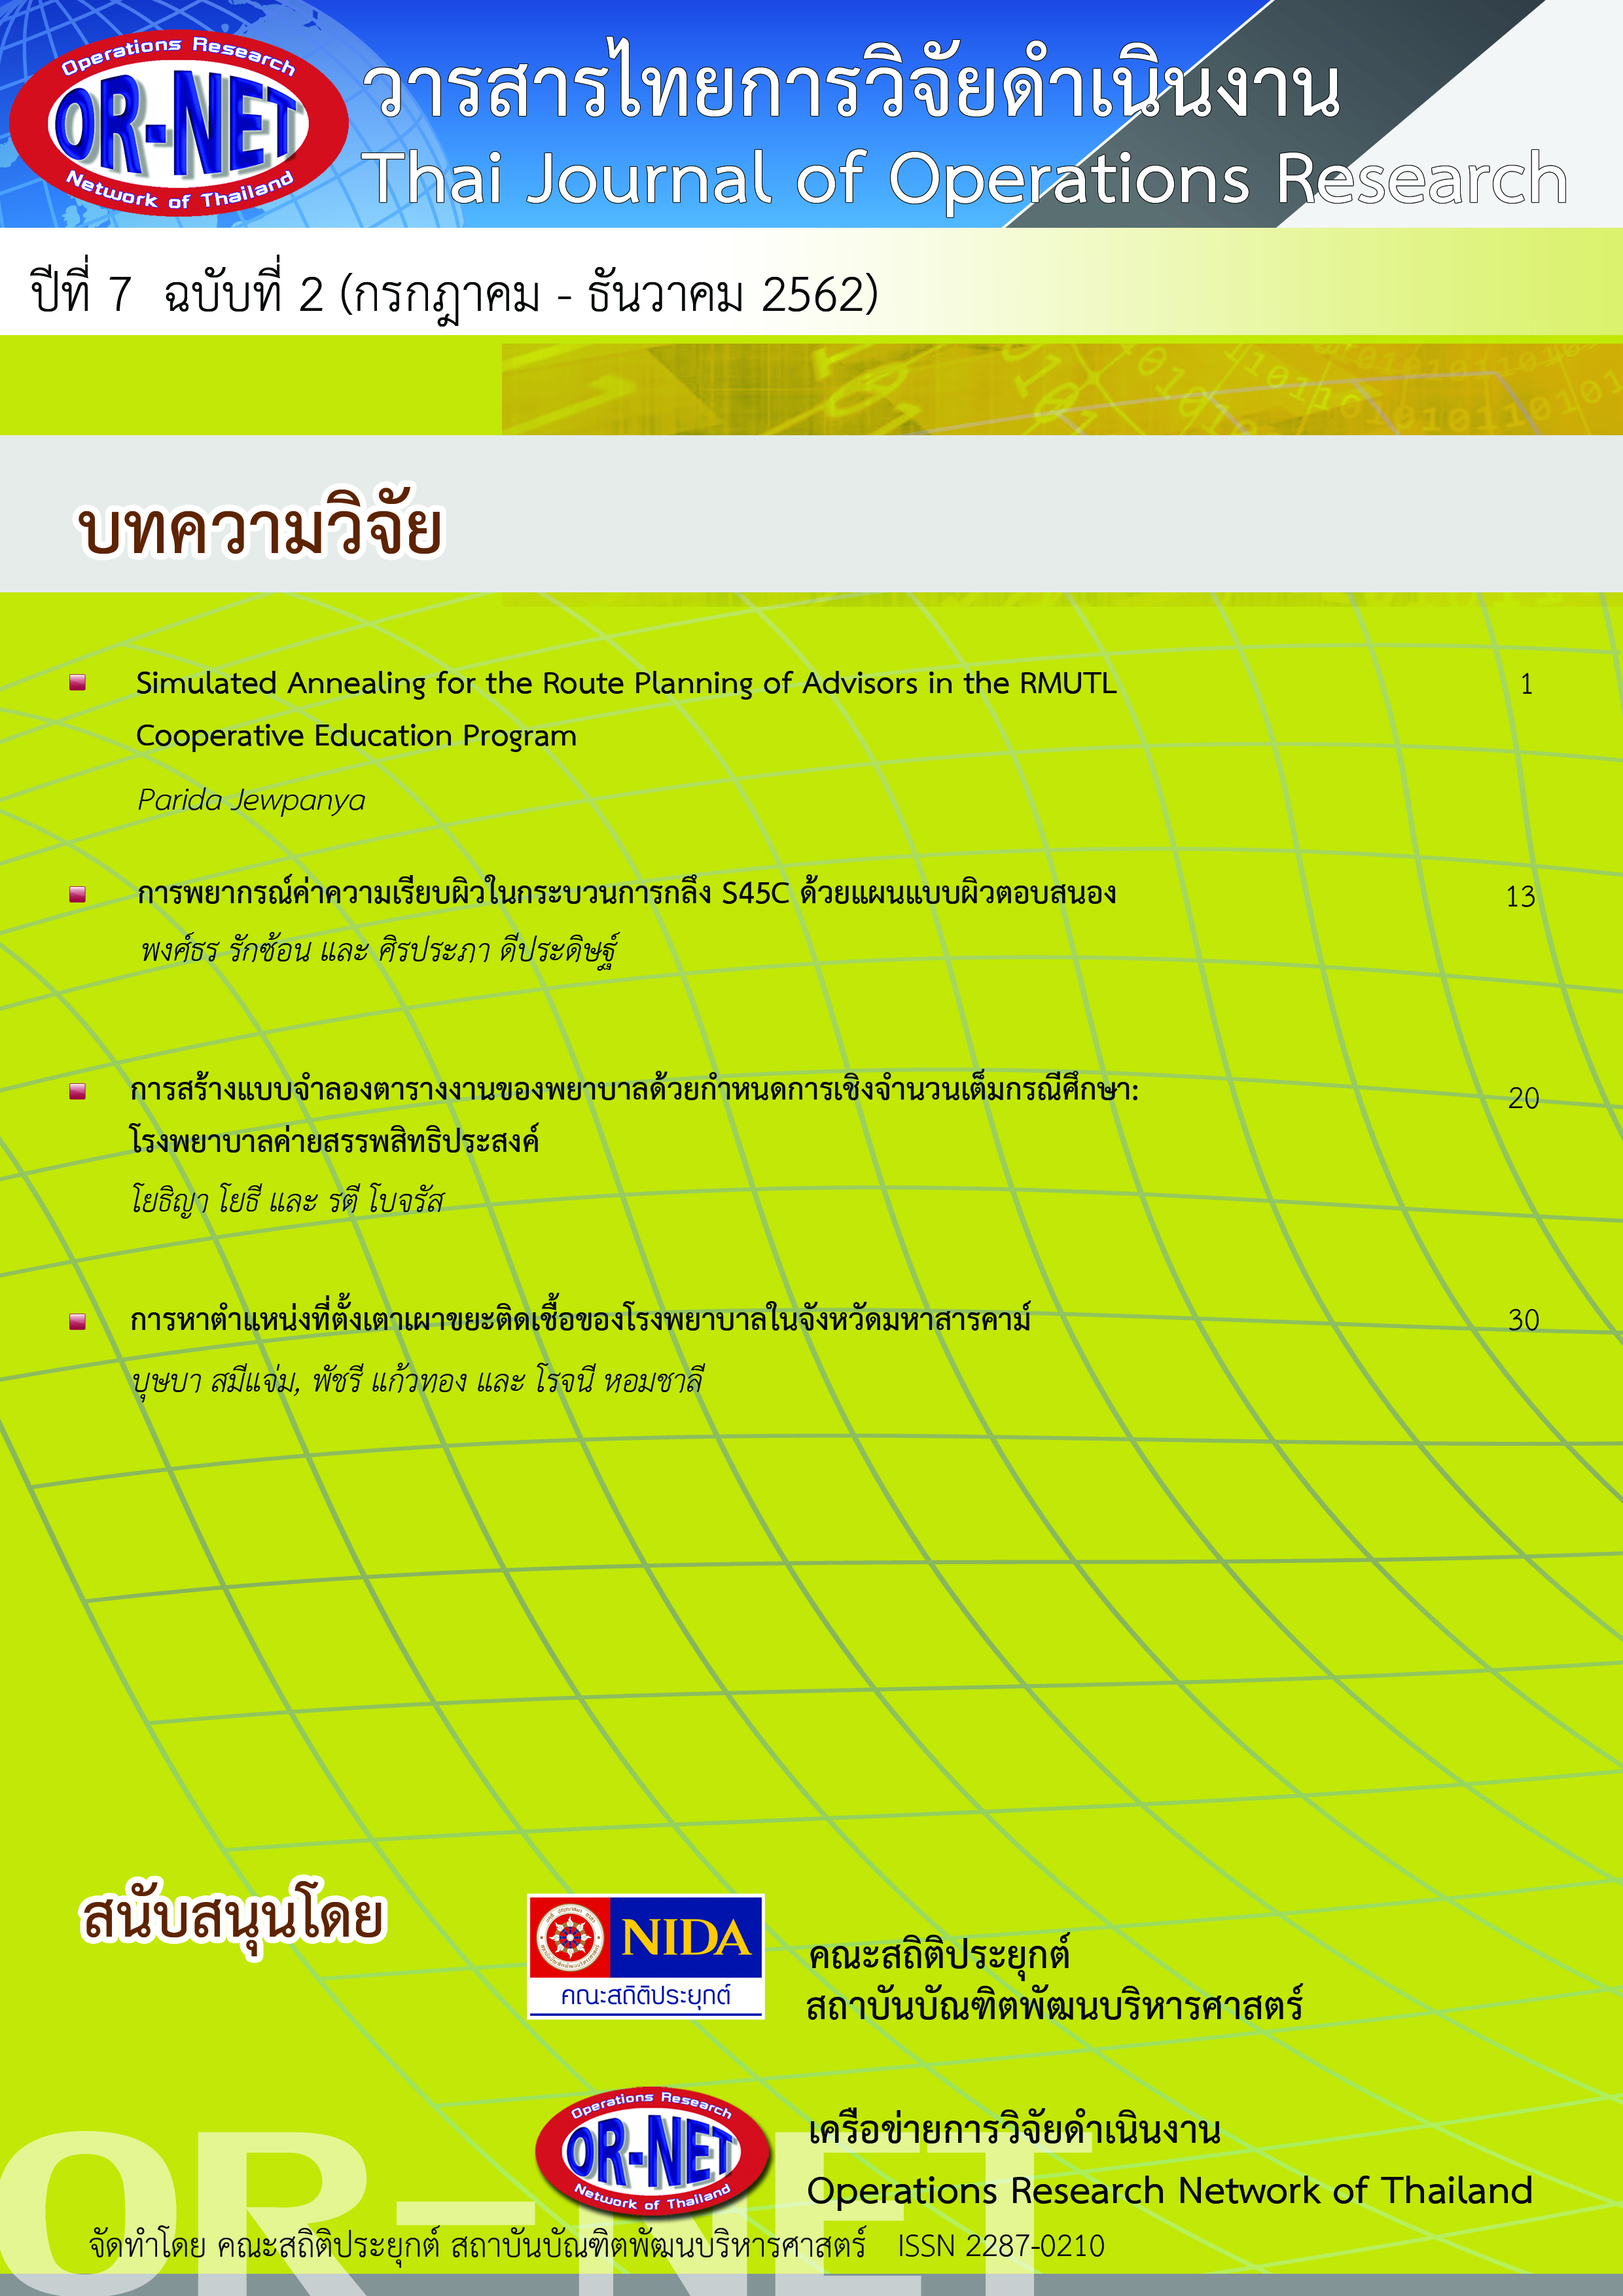 					View Vol. 7 No. 2 (2019): Thai Journal of Operations Research: TJOR Vol 7 No 2 July - December 2019
				